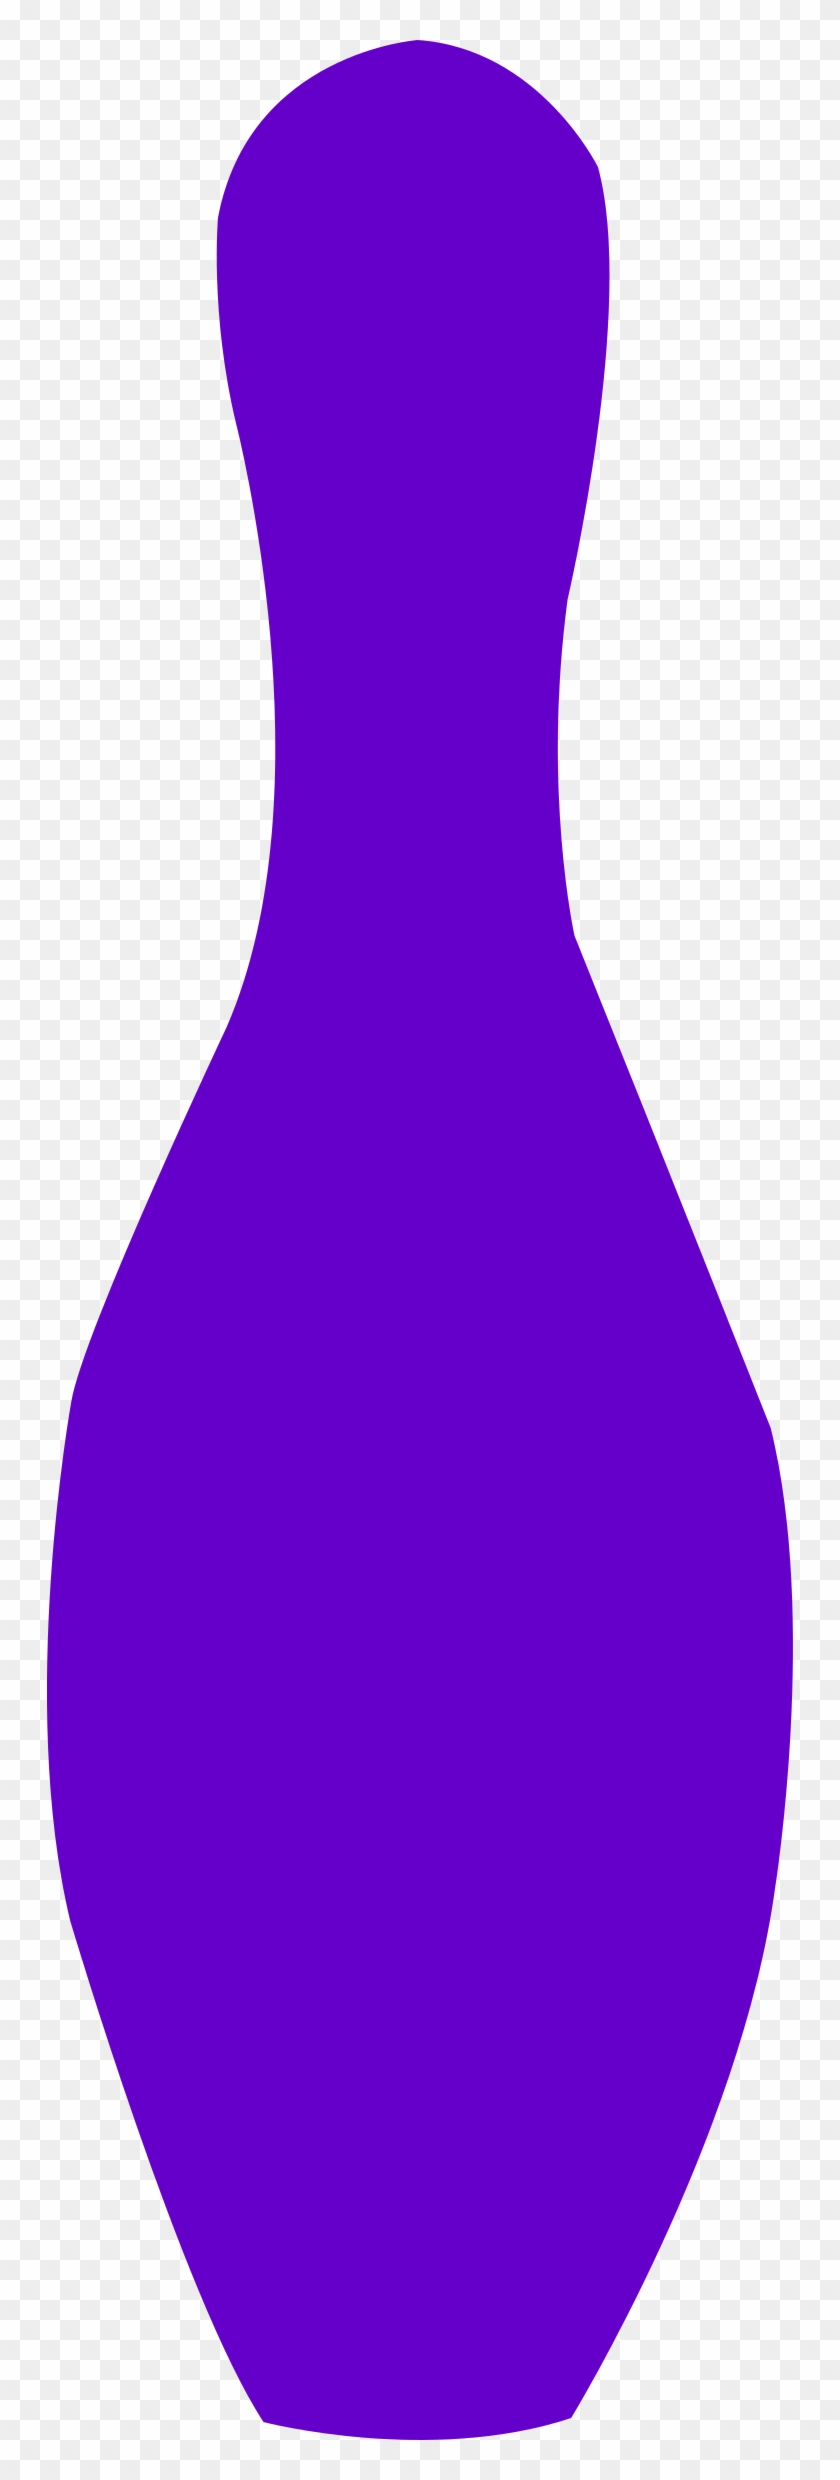 This Free Icons Png Design Of Bowling Pin Opurple Clipart #1122755